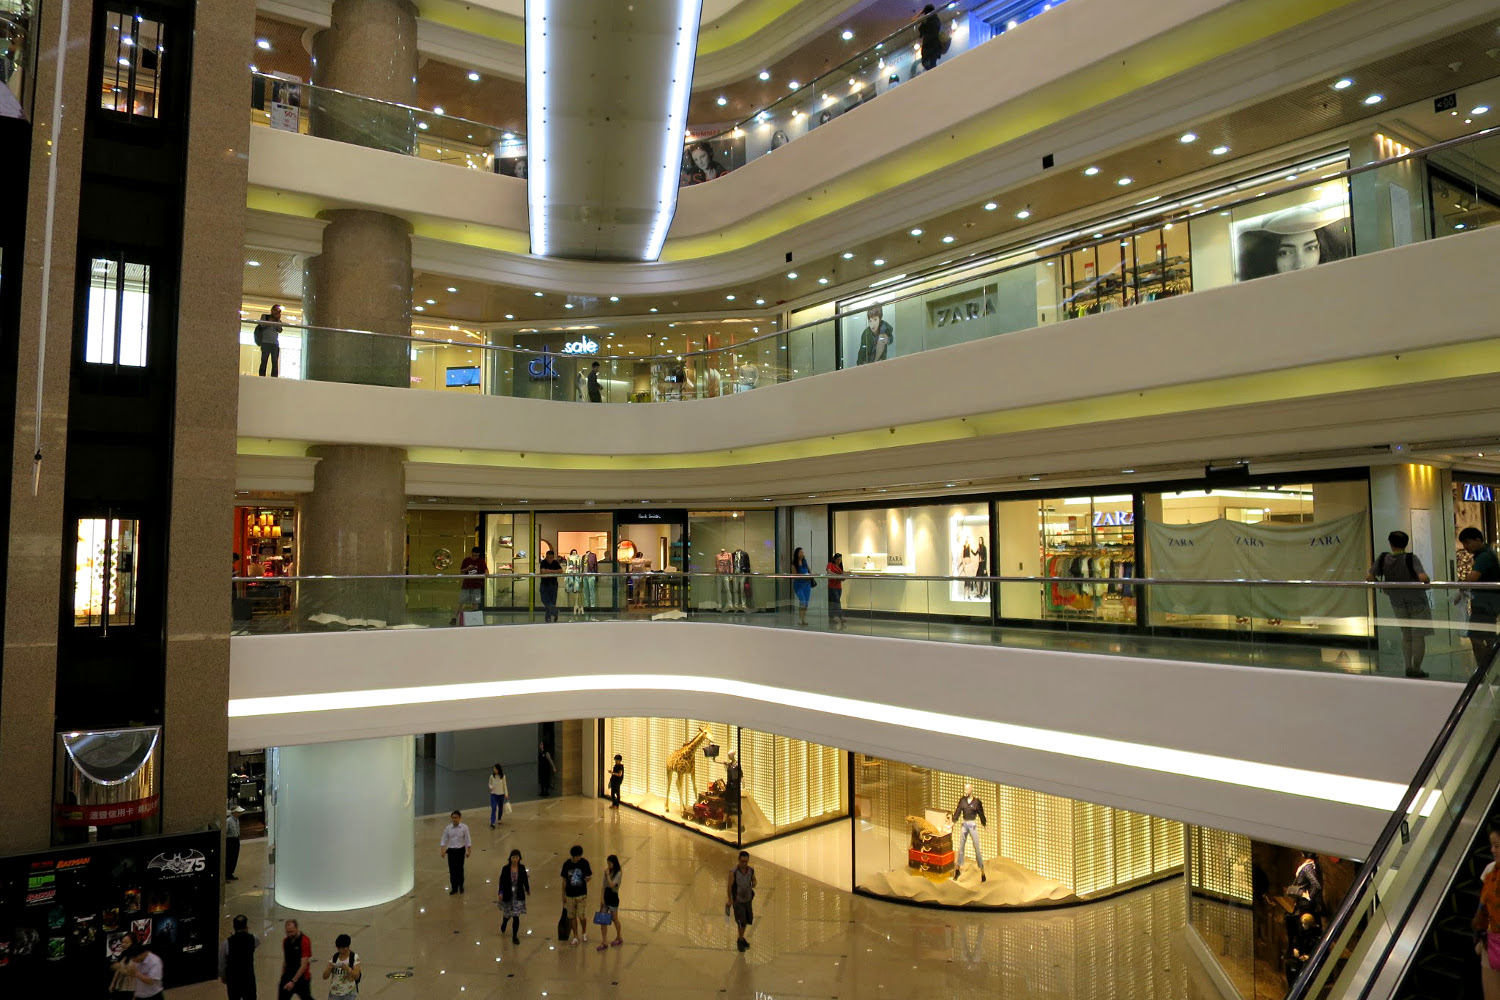 Times Square in Causeway Bay is brimming with designer stores. Image by Megan Eaves / londoninfopage